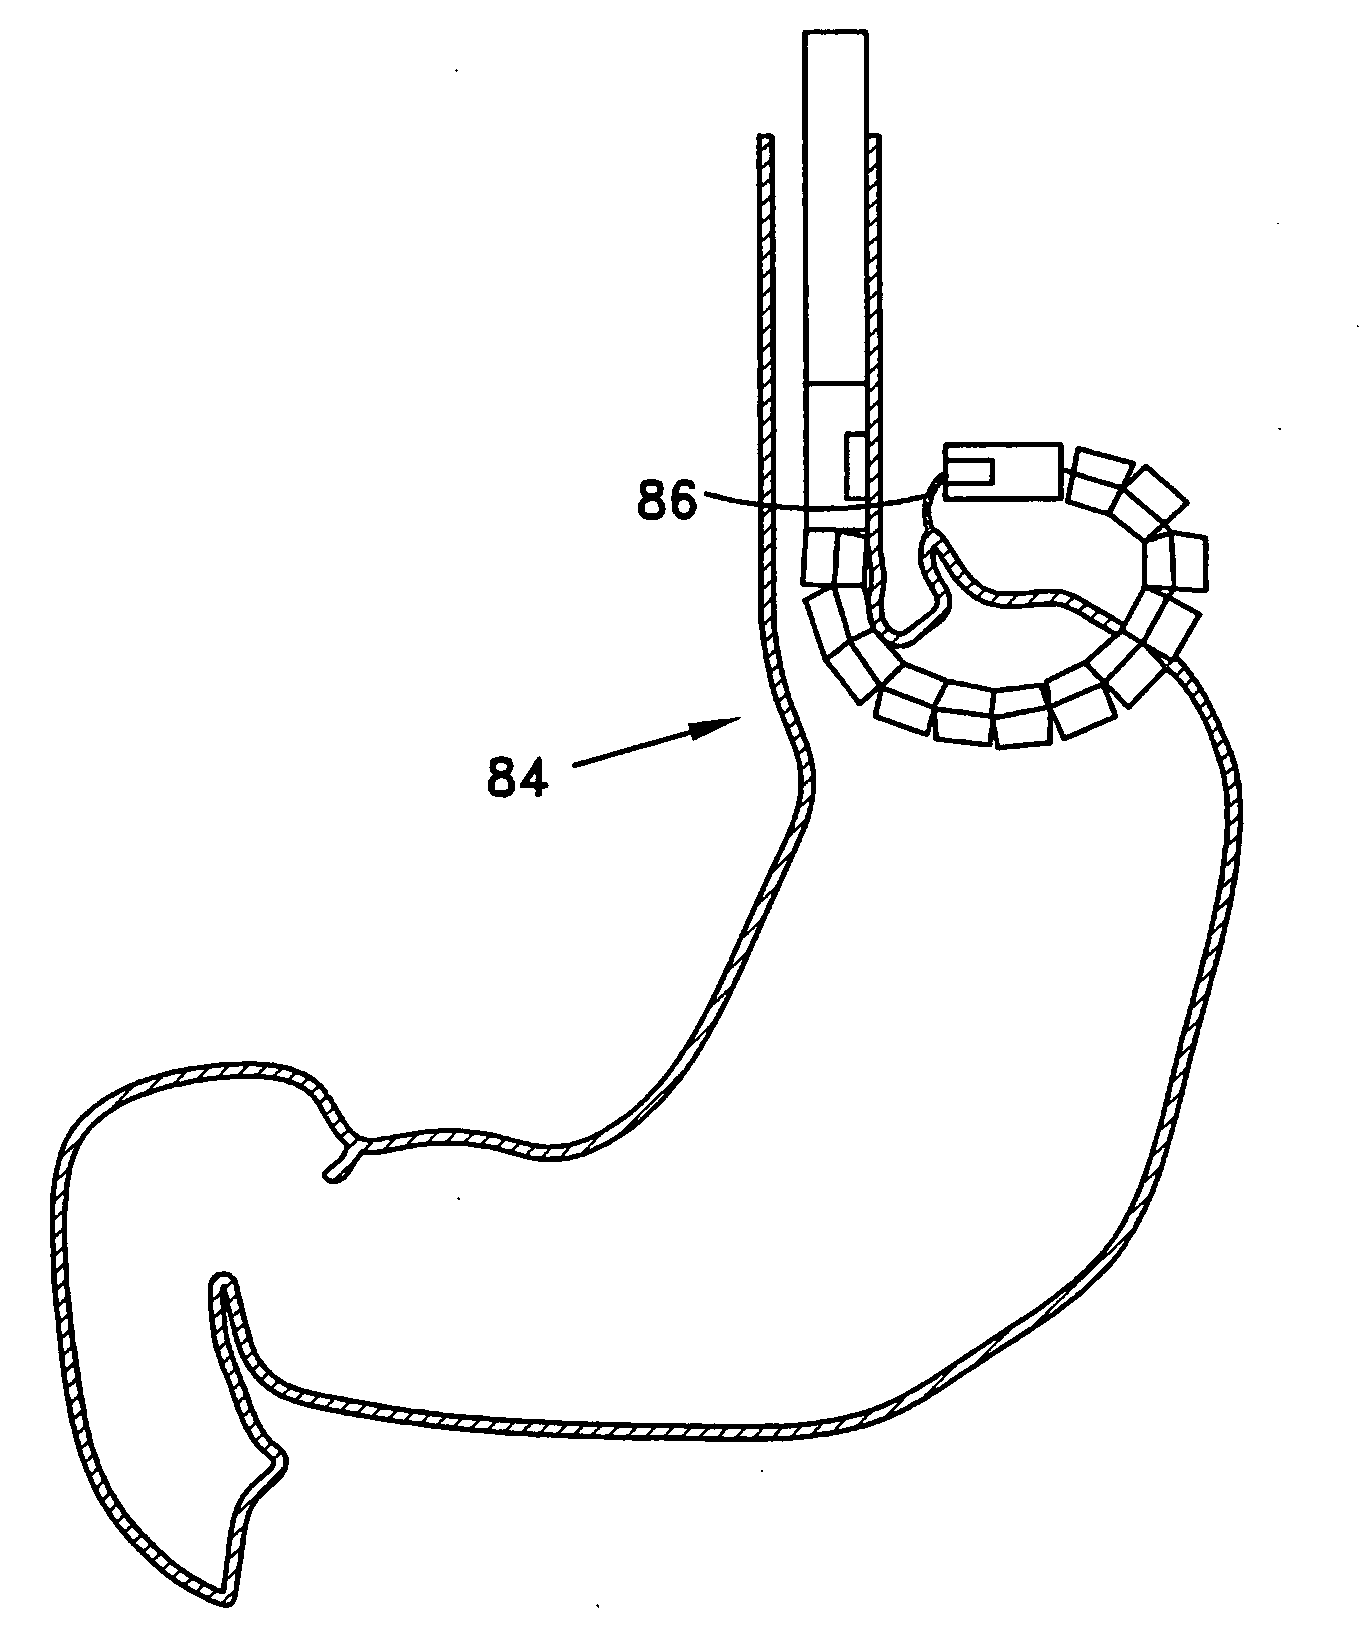 Transgastric method for carrying out a partial fundoplication